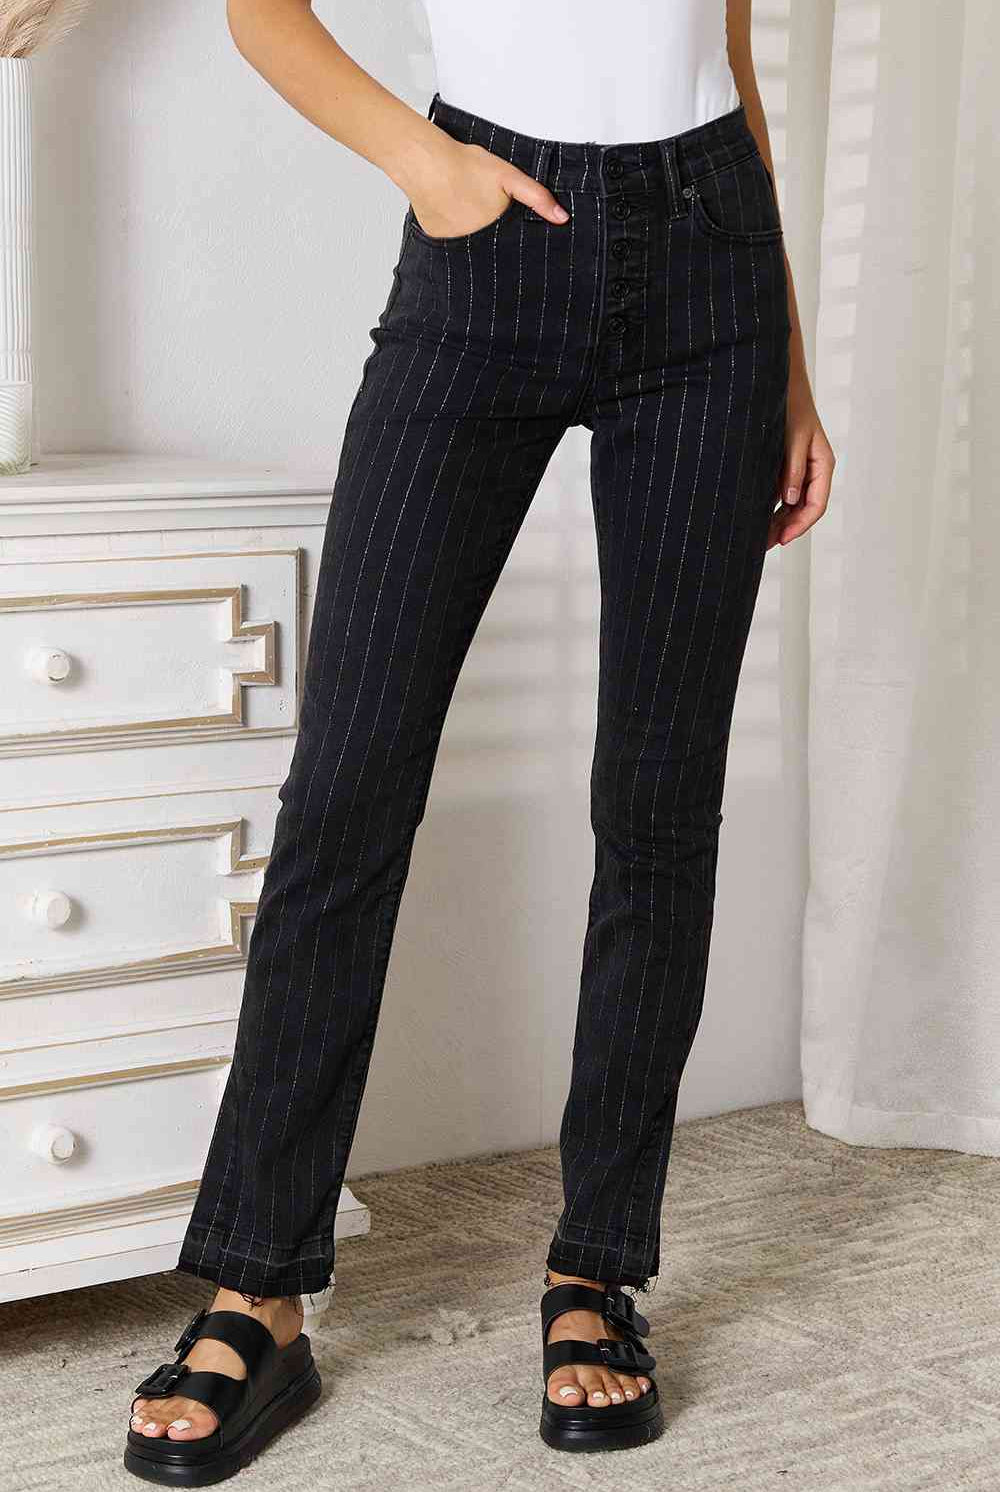 Gray Kancan Striped Pants with Pockets Clothing